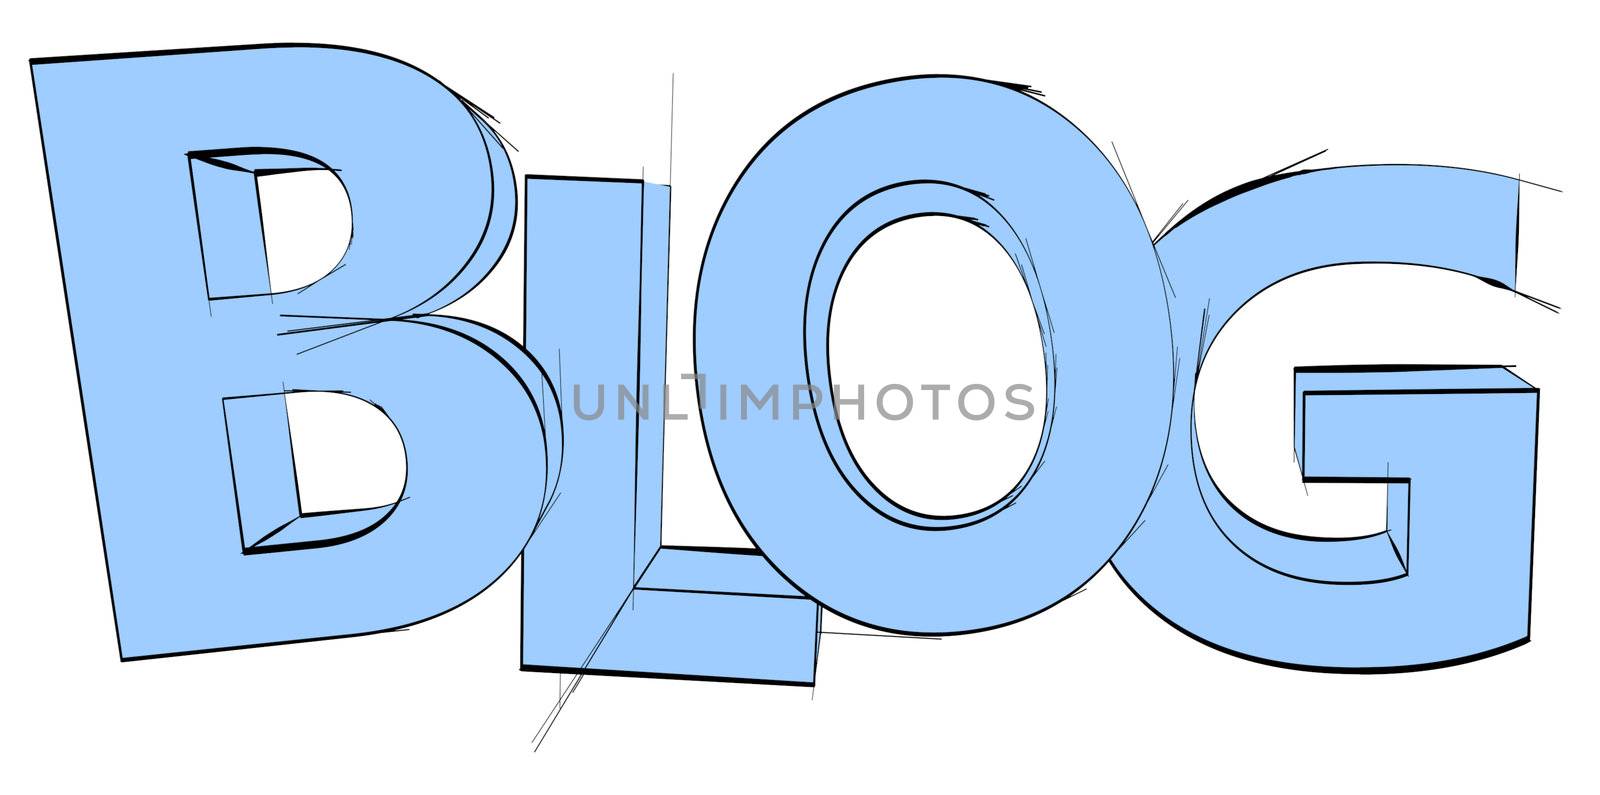 Blue word "Blog" isolated on the white background